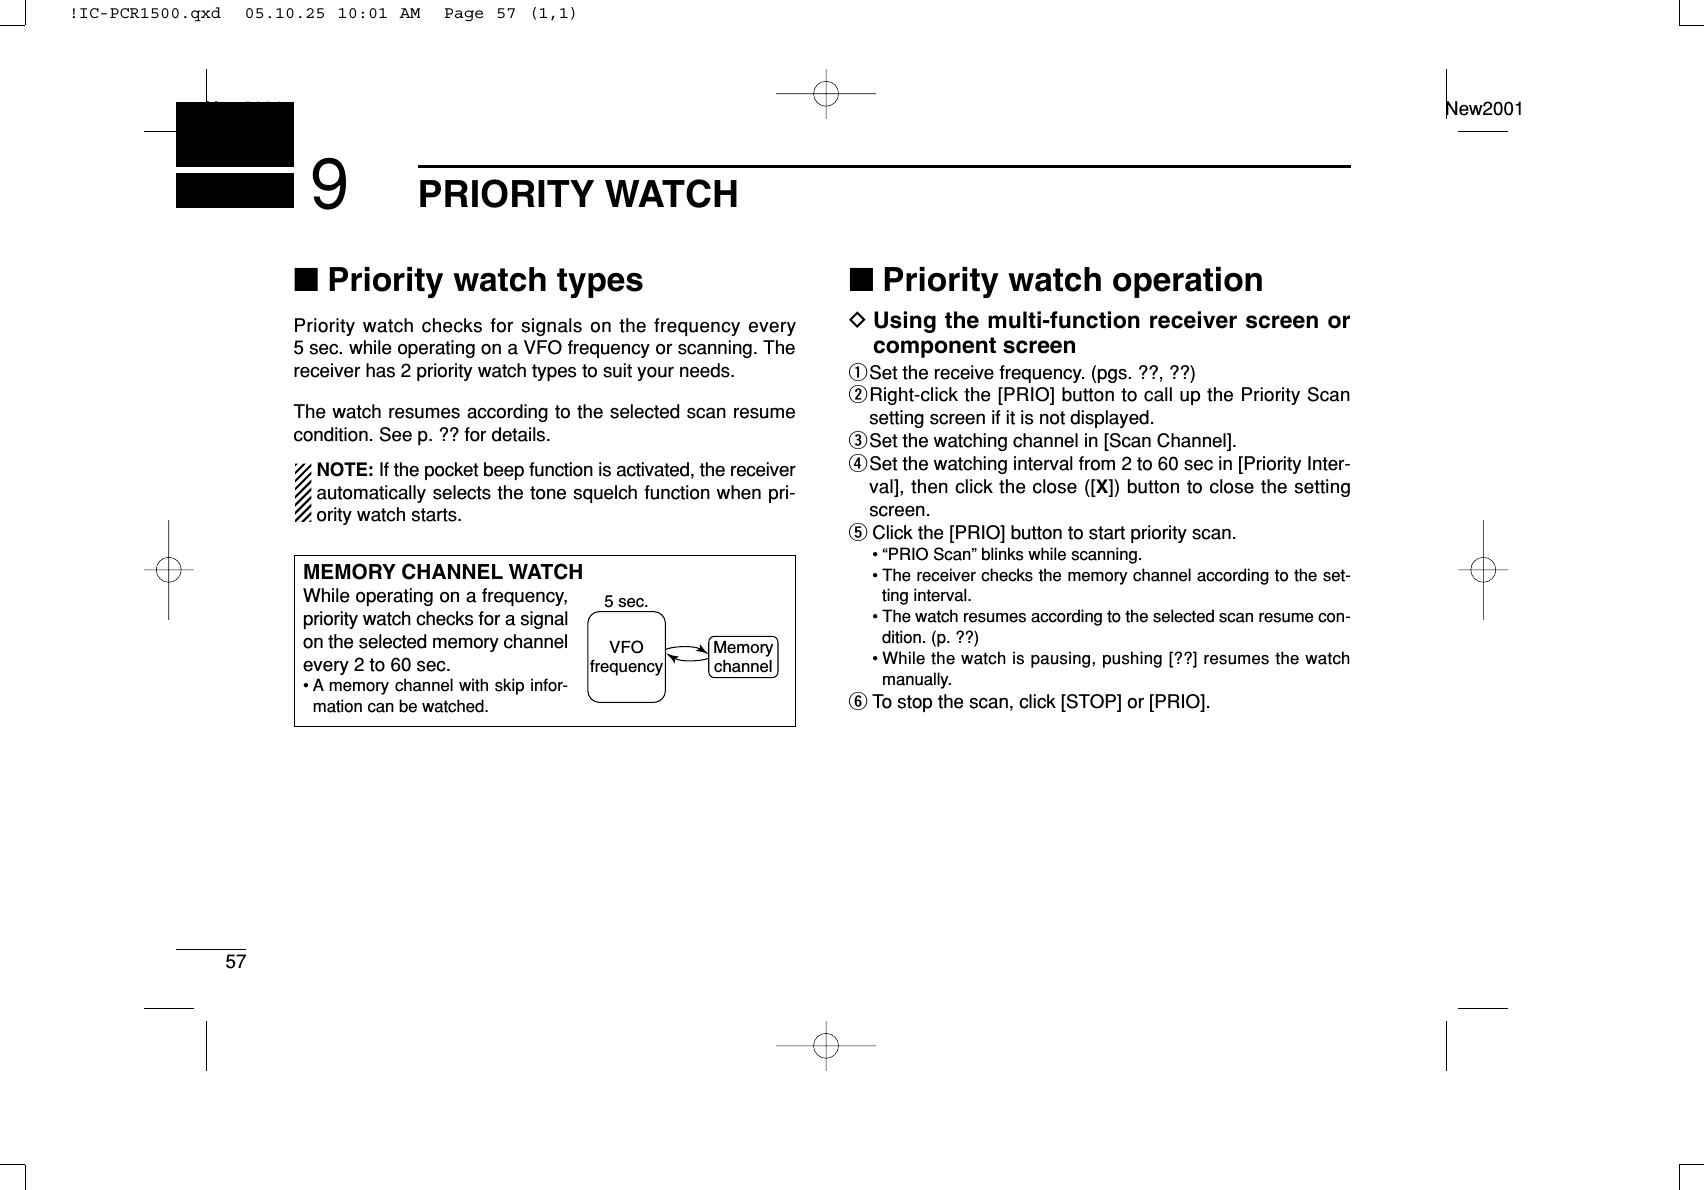 57PRIORITY WATCHNew2001New20019■Priority watch typesPriority watch checks for signals on the frequency every5 sec. while operating on a VFO frequency or scanning. Thereceiver has 2 priority watch types to suit your needs.The watch resumes according to the selected scan resumecondition. See p. ?? for details.NOTE: If the pocket beep function is activated, the receiverautomatically selects the tone squelch function when pri-ority watch starts.■Priority watch operationDUsing the multi-function receiver screen orcomponent screenqSet the receive frequency. (pgs. ??, ??)wRight-click the [PRIO] button to call up the Priority Scansetting screen if it is not displayed.eSet the watching channel in [Scan Channel].rSet the watching interval from 2 to 60 sec in [Priority Inter-val], then click the close ([X]) button to close the settingscreen.tClick the [PRIO] button to start priority scan.• “PRIO Scan” blinks while scanning.• The receiver checks the memory channel according to the set-ting interval.• The watch resumes according to the selected scan resume con-dition. (p. ??)• While the watch is pausing, pushing [??] resumes the watchmanually.yTo stop the scan, click [STOP] or [PRIO].MEMORY CHANNEL WATCHWhile operating on a frequency,priority watch checks for a signalon the selected memory channelevery 2 to 60 sec.• A memory channel with skip infor-mation can be watched.5 sec.VFOfrequencyMemorychannel!IC-PCR1500.qxd  05.10.25 10:01 AM  Page 57 (1,1)